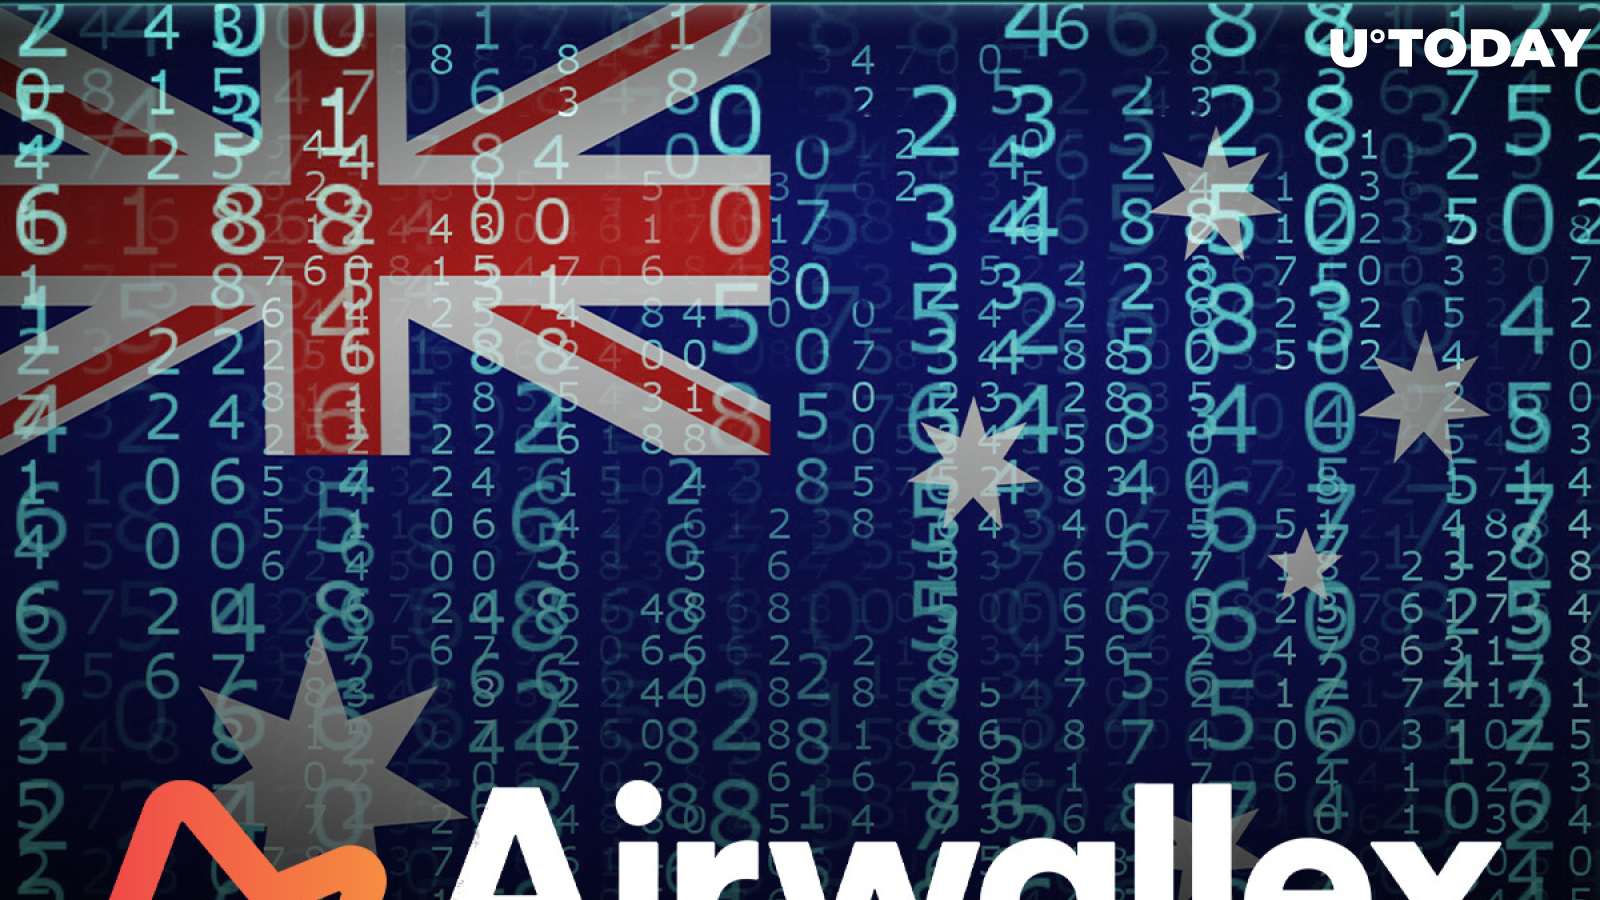 Ripple Client Airwallex Unicorn Launches Solution for Online Card Payments in Australia